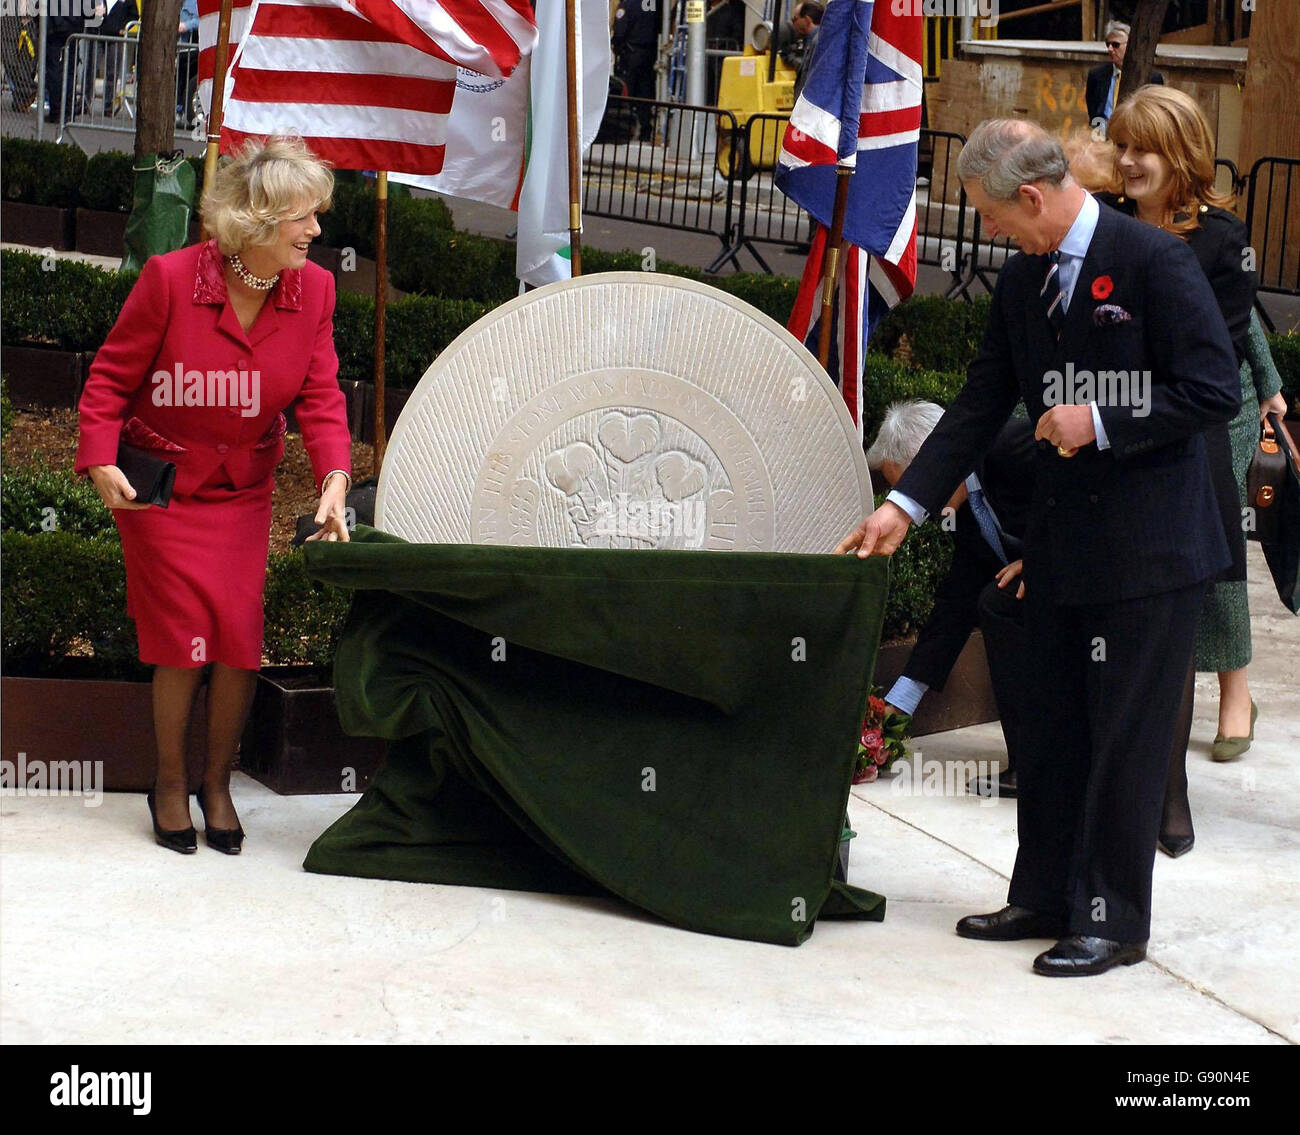 The Prince of Wales with his wife the Duchess of Cornwall, unveil a stone plaque in the British Memorial Gardens in Hanover Square New York City, Tuesday November 1, 2005. The garden is a living memorial to the 67 British victims of the terrorist attack on the World Trade Centre, on the September 9, 2001. The Prince of Wales and the Duchess of Cornwall arrived in the city at the start of a week-long tour of the USA, which will take them from New York to Washington and on to San Francisco. See PA story ROYAL Charles. PRESS ASSOCIATION Photo. Photo credit should read: John Stillwell/PA. Stock Photo